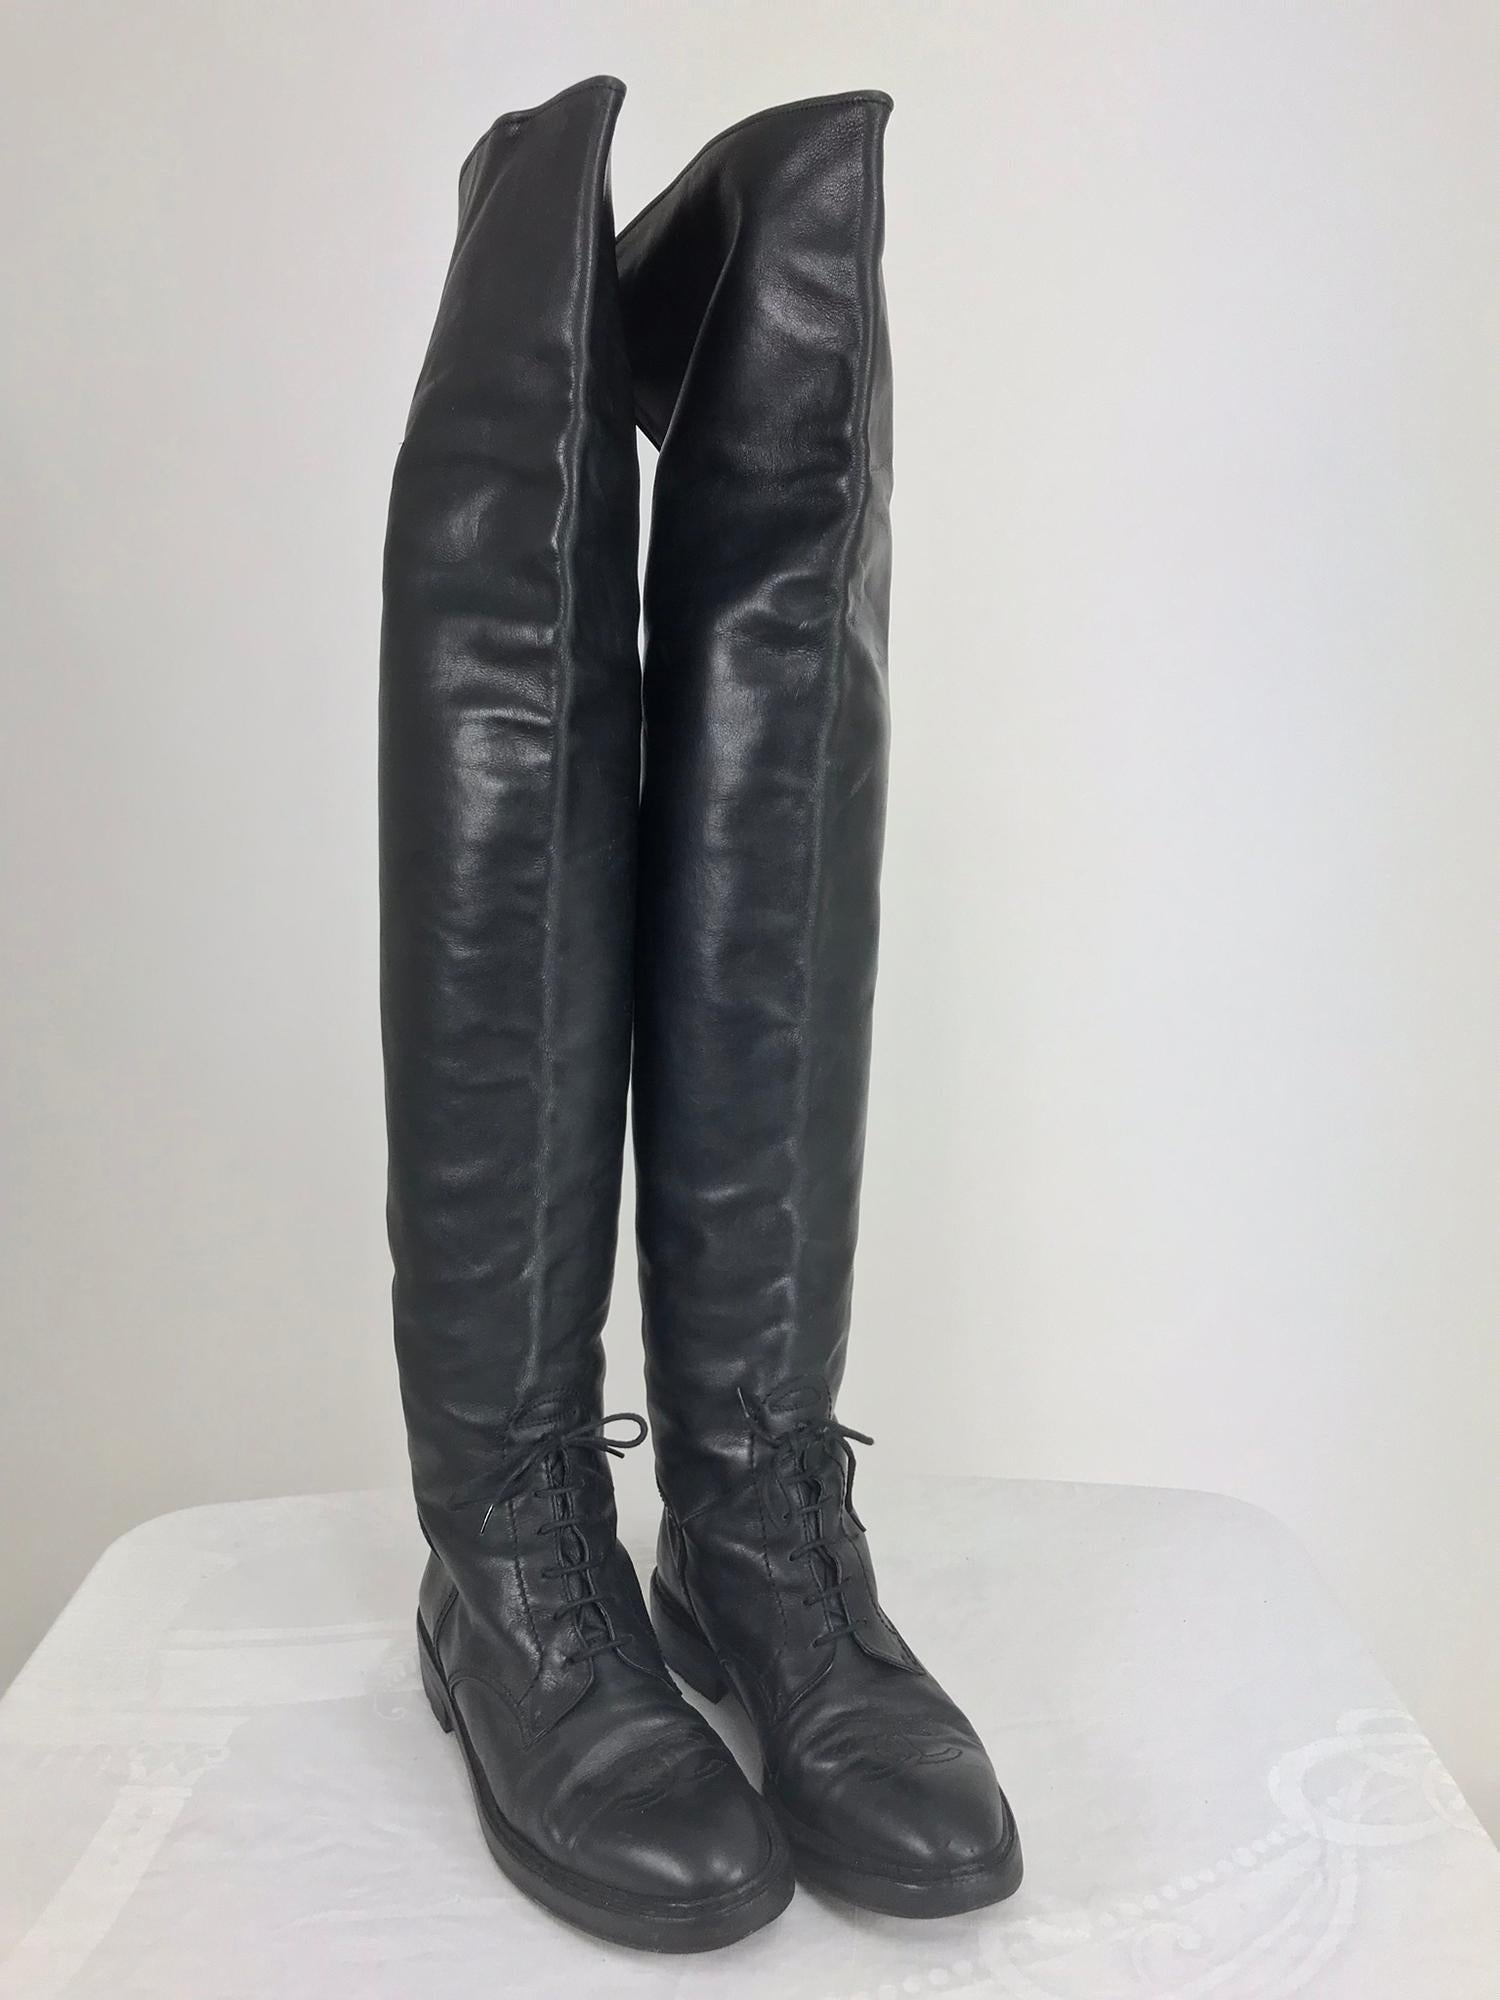 Chanel Over the knee black leather riding boots, Claudia Schiffer editorial worn 1990s. These boots are amazing, traditional riding boot style, with the addition of tops that can be worn up, thigh length, or turned over in a cuff. The leather has a